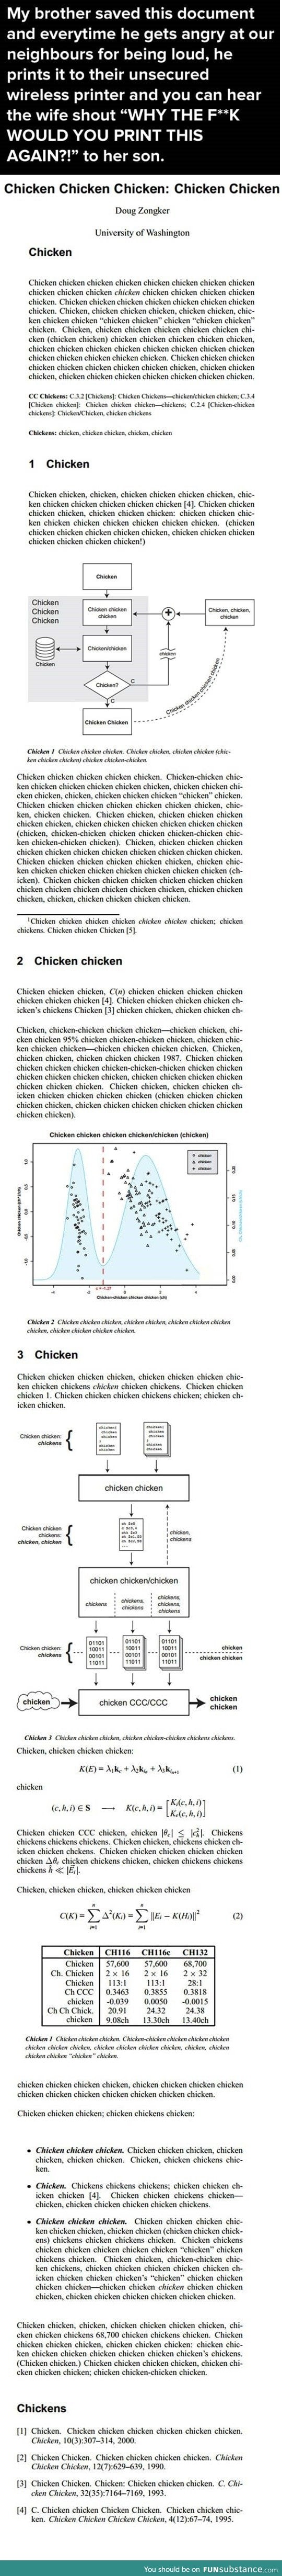 Chicken is the meaning to life